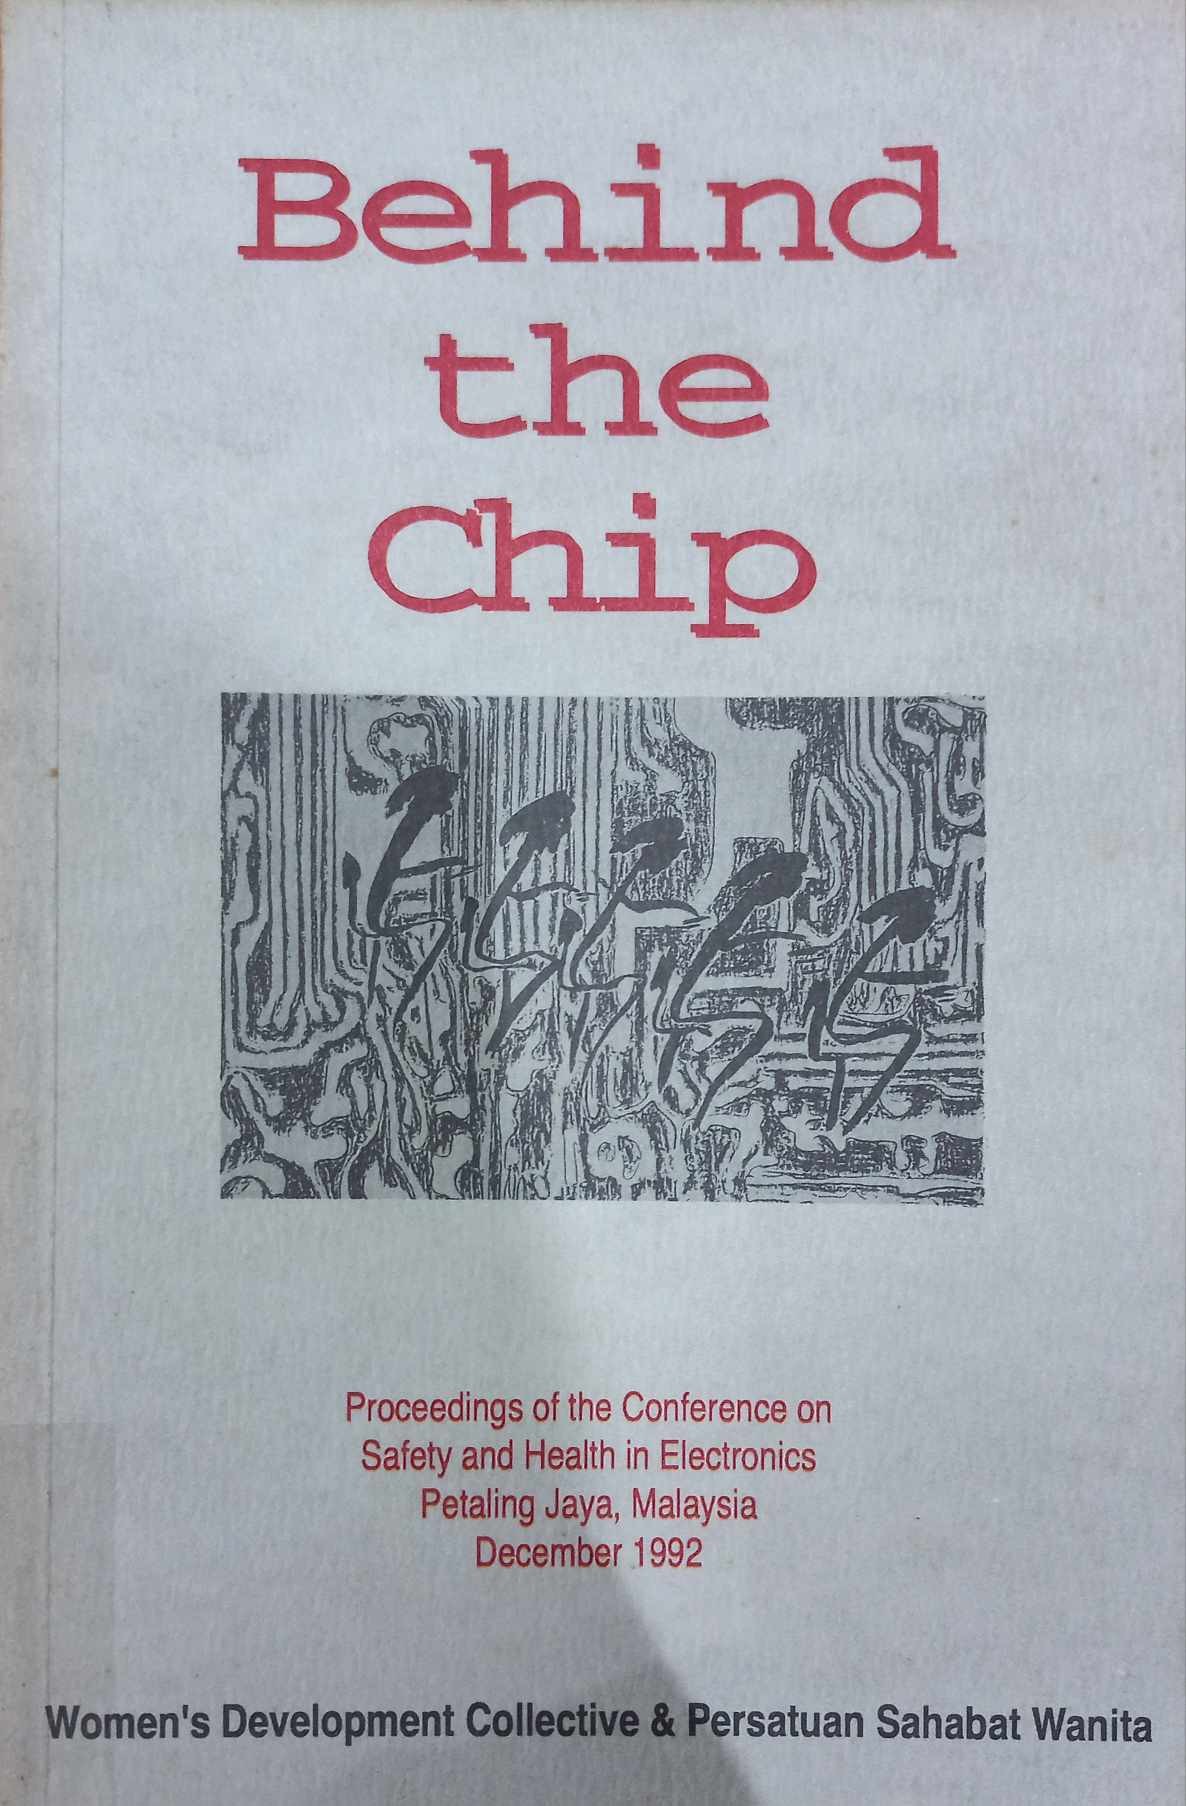 Behind the Chip